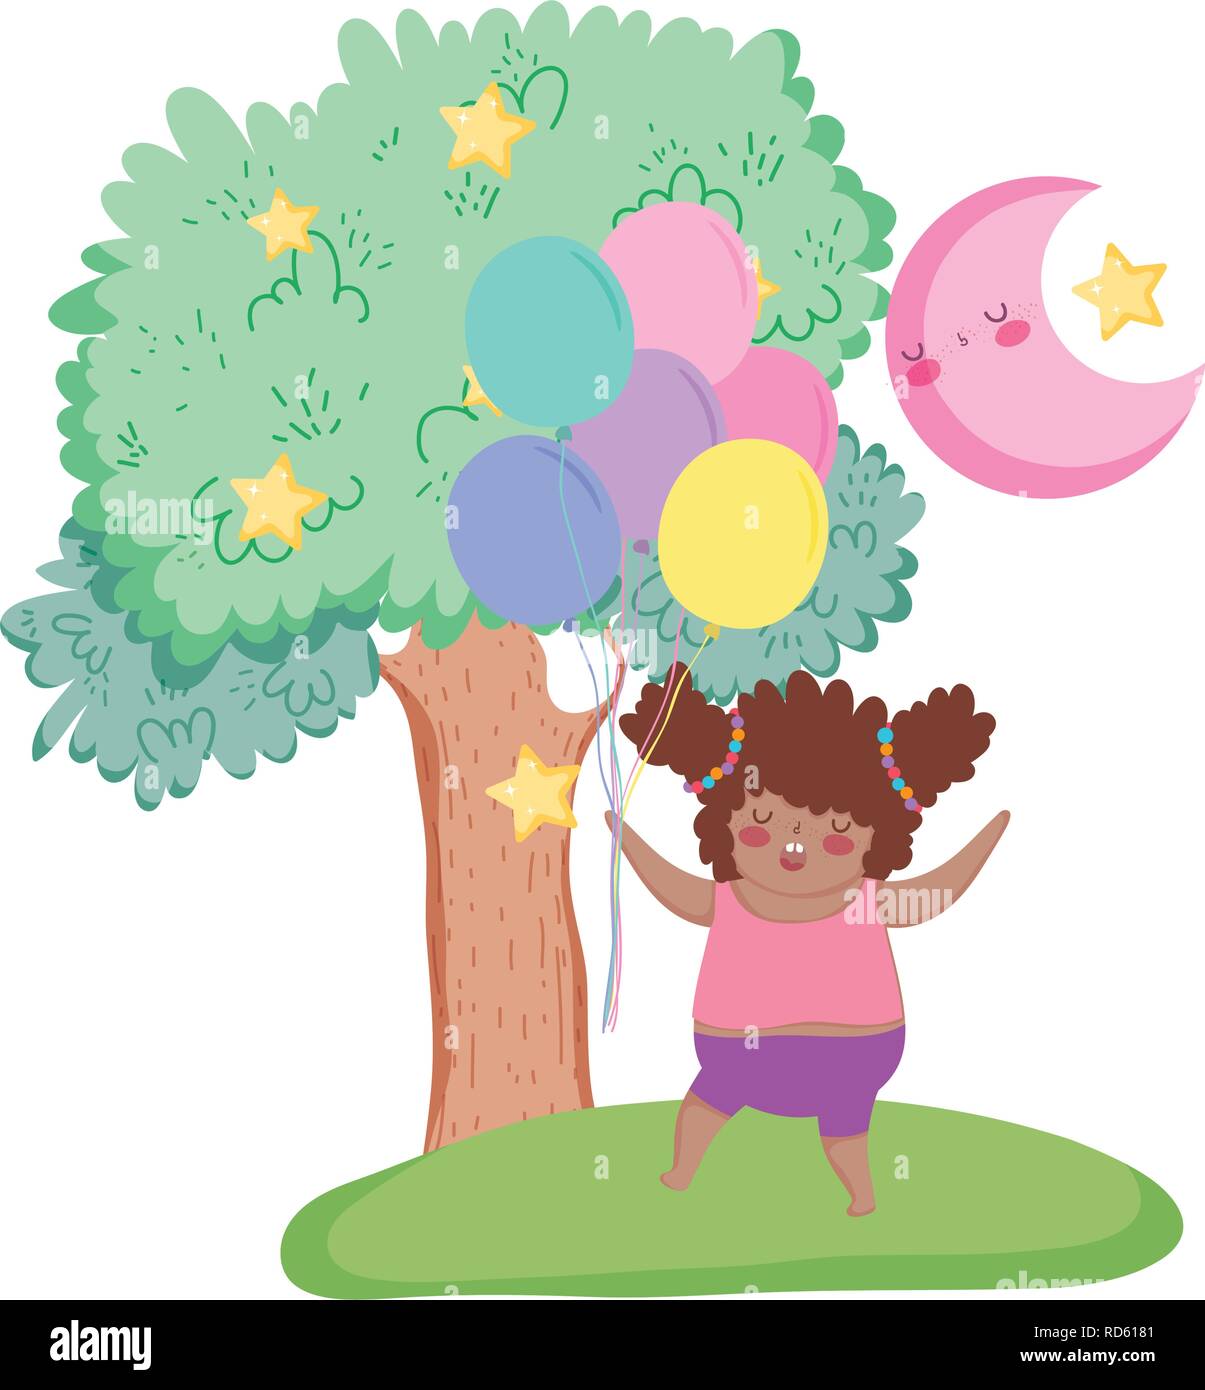 Little Chubby Girl With Balloons Air In The Landscape Stock Vector Image And Art Alamy 5064